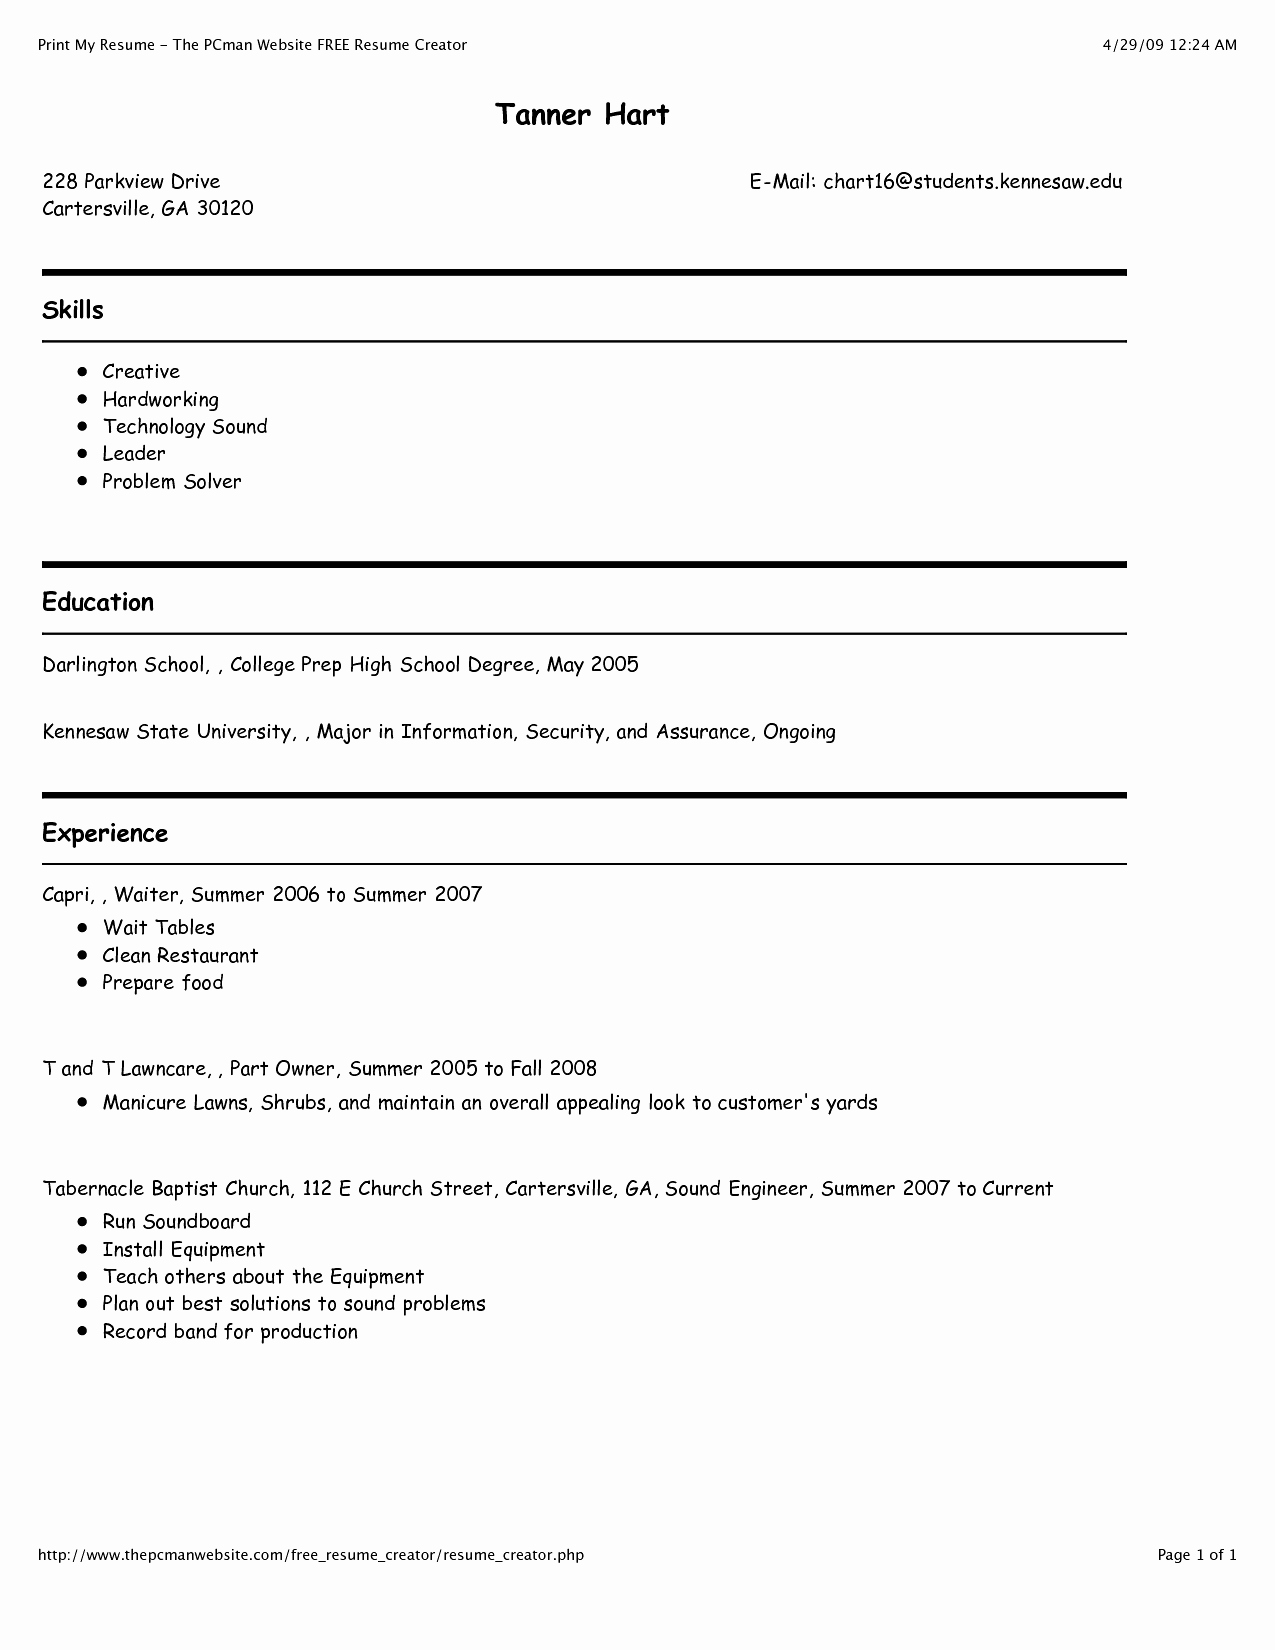 Free Resume Builder and Print